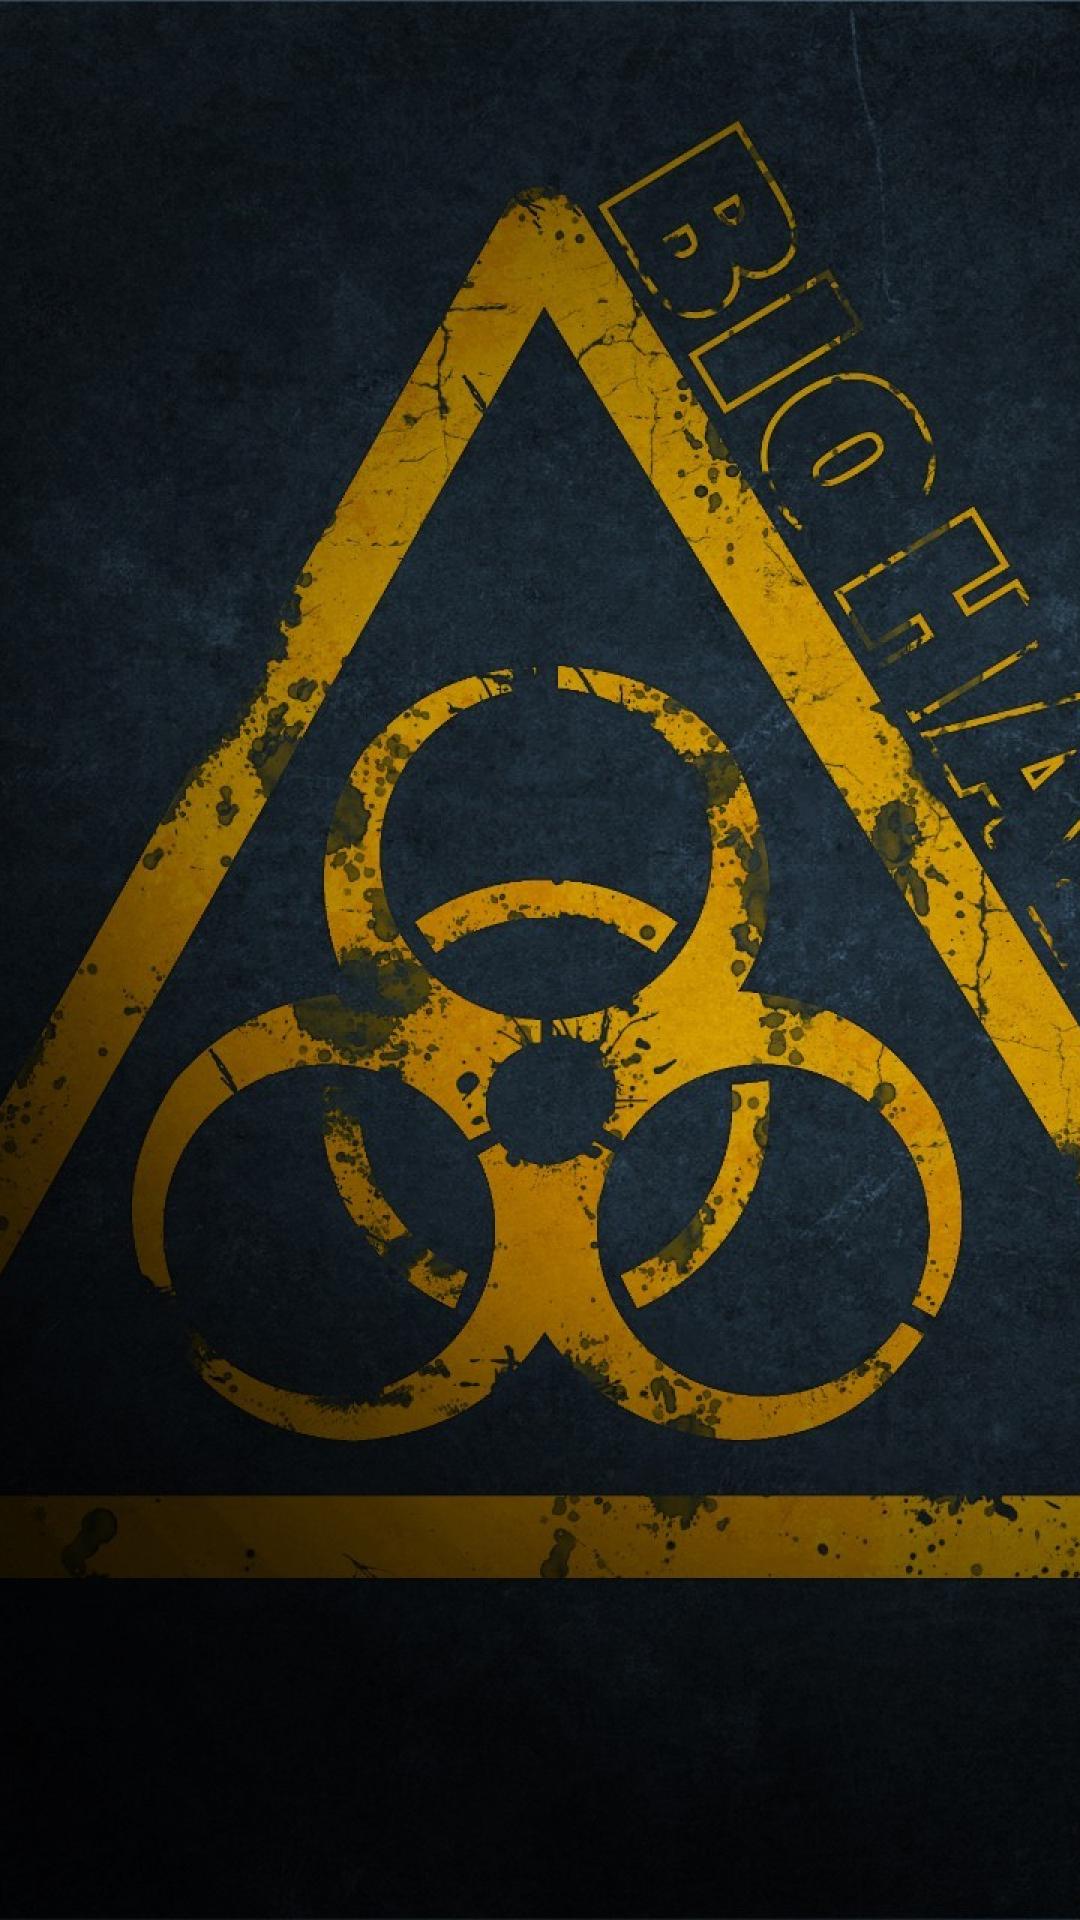 danger wallpaper hd for mobile,yellow,sign,triangle,font,logo